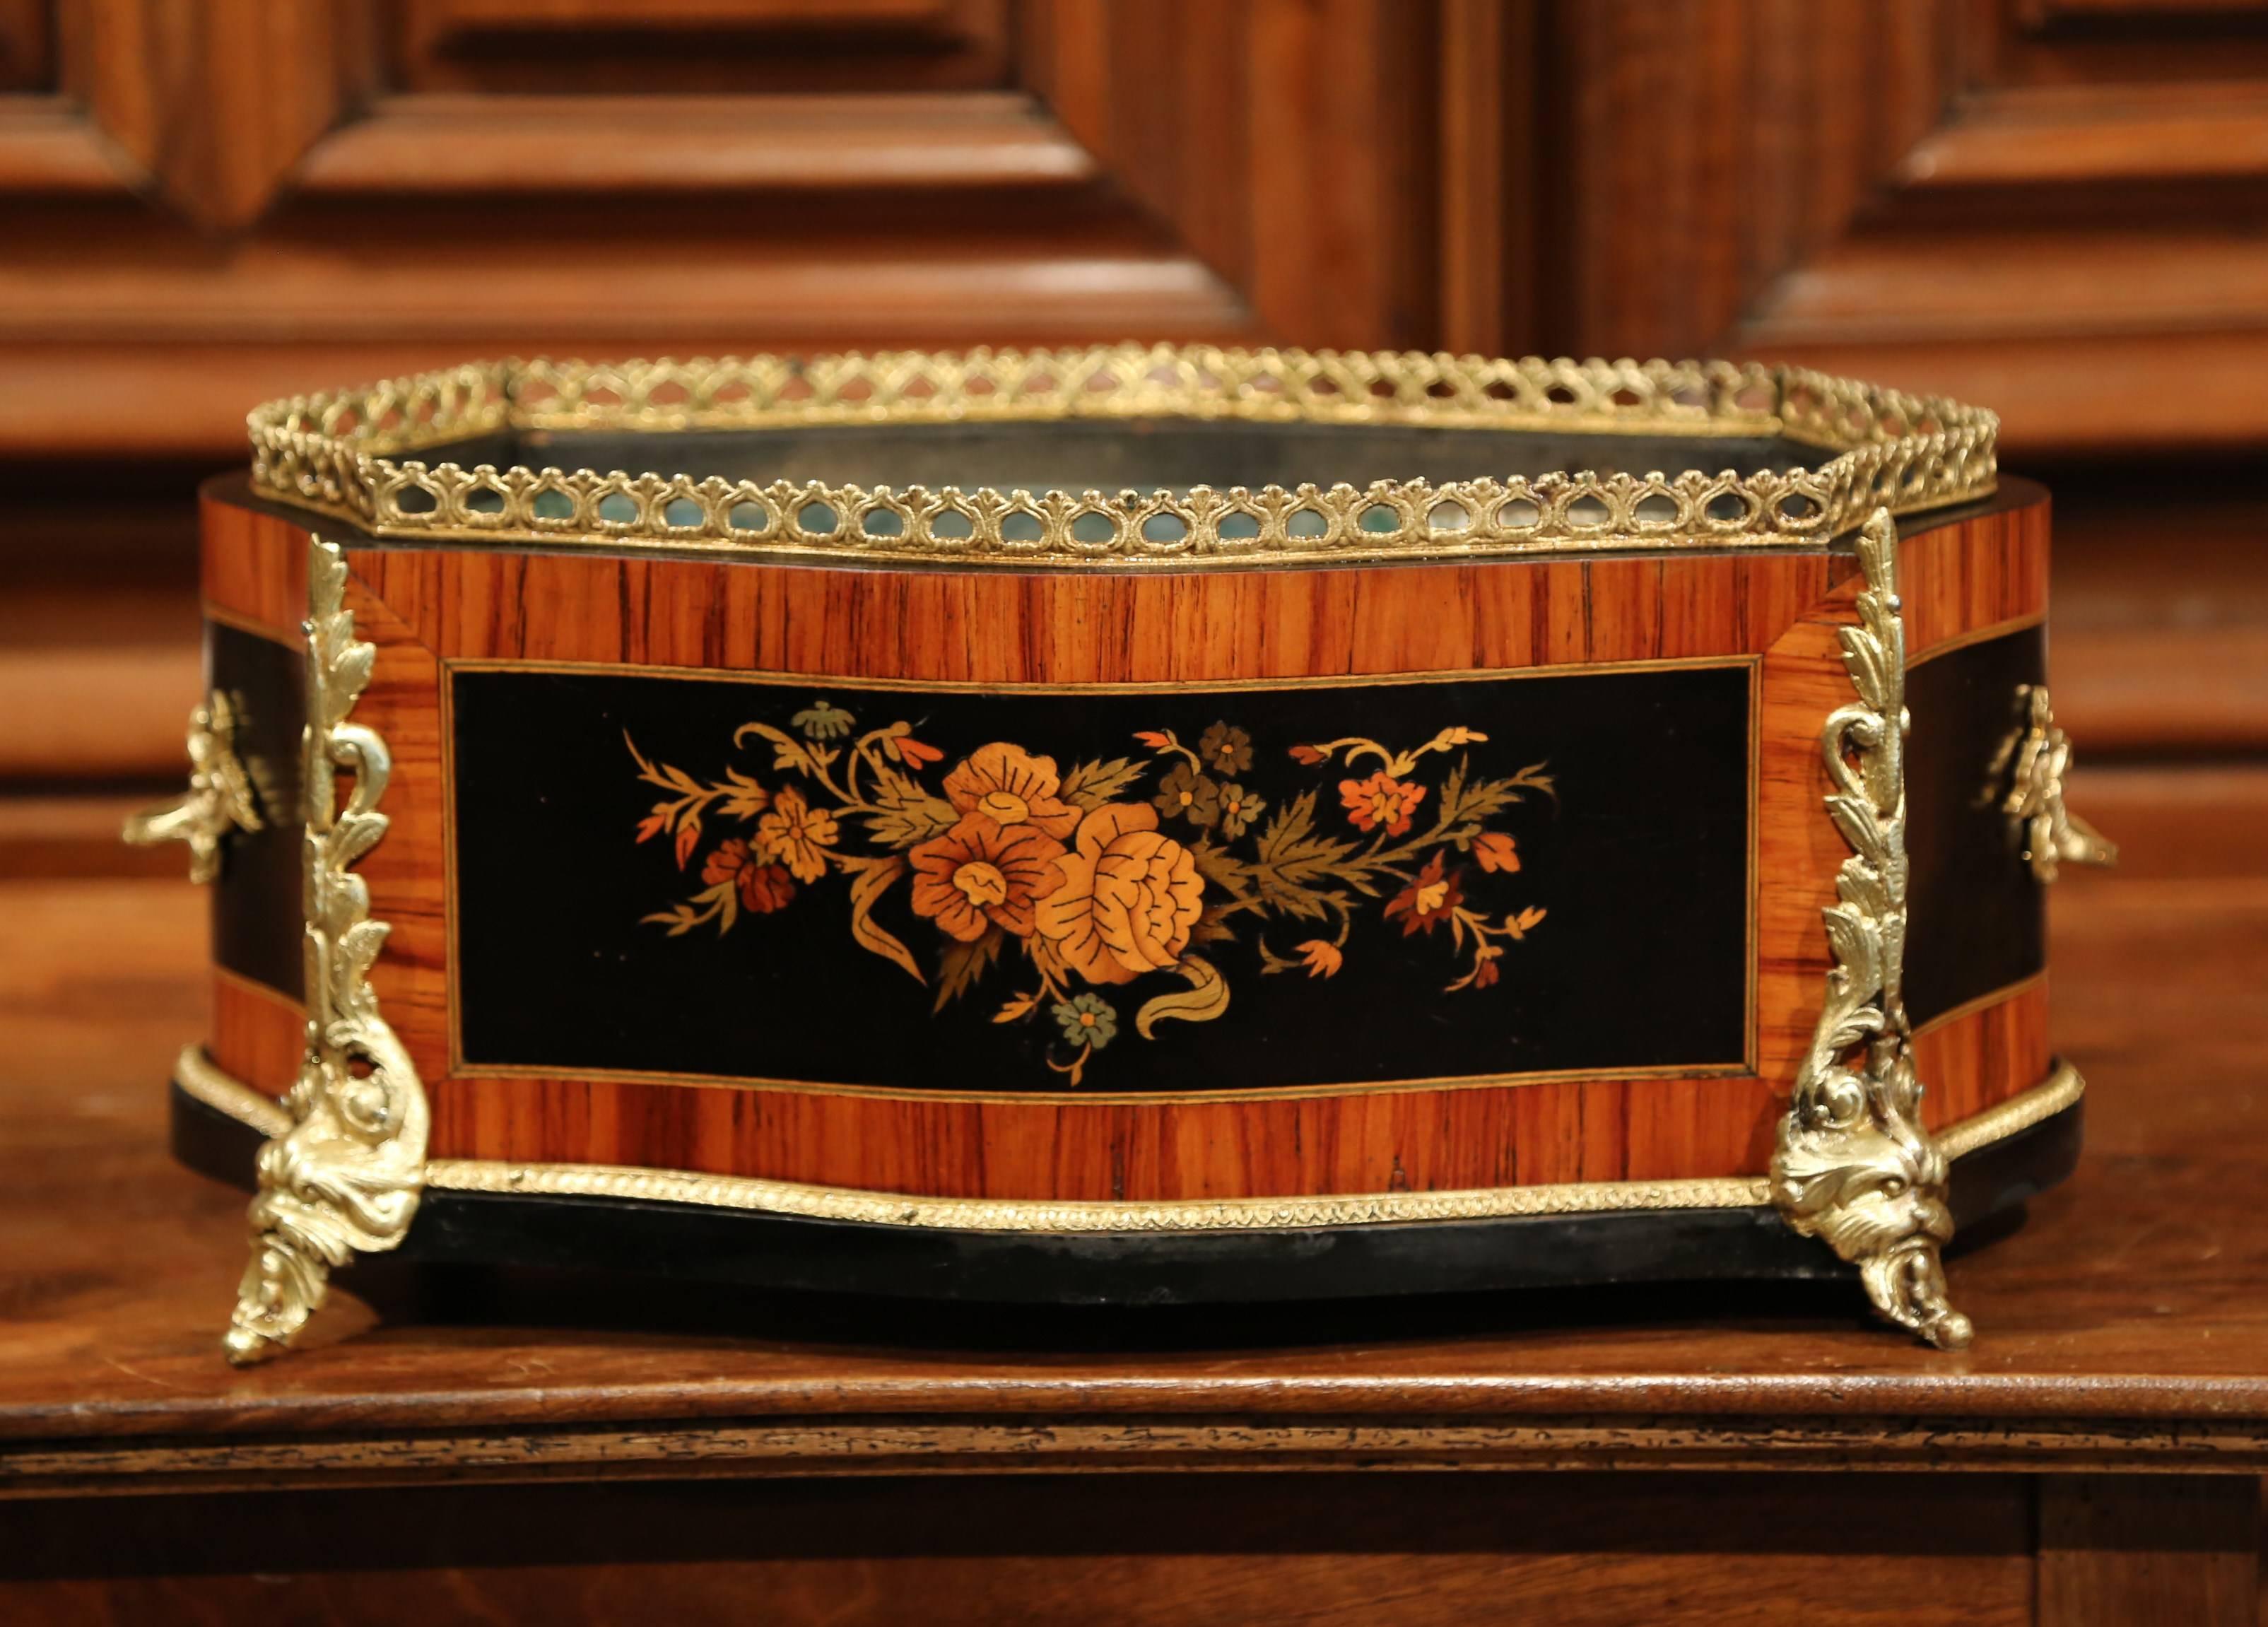 This beautifully crafted, oval Napoleon III fruitwood planter was crafted in Paris, France circa 1870. The antique, rosewood and ebony jardiniere features wood marquetry and parquetry work with a very detailed inlay of colorful flowers and leaves on